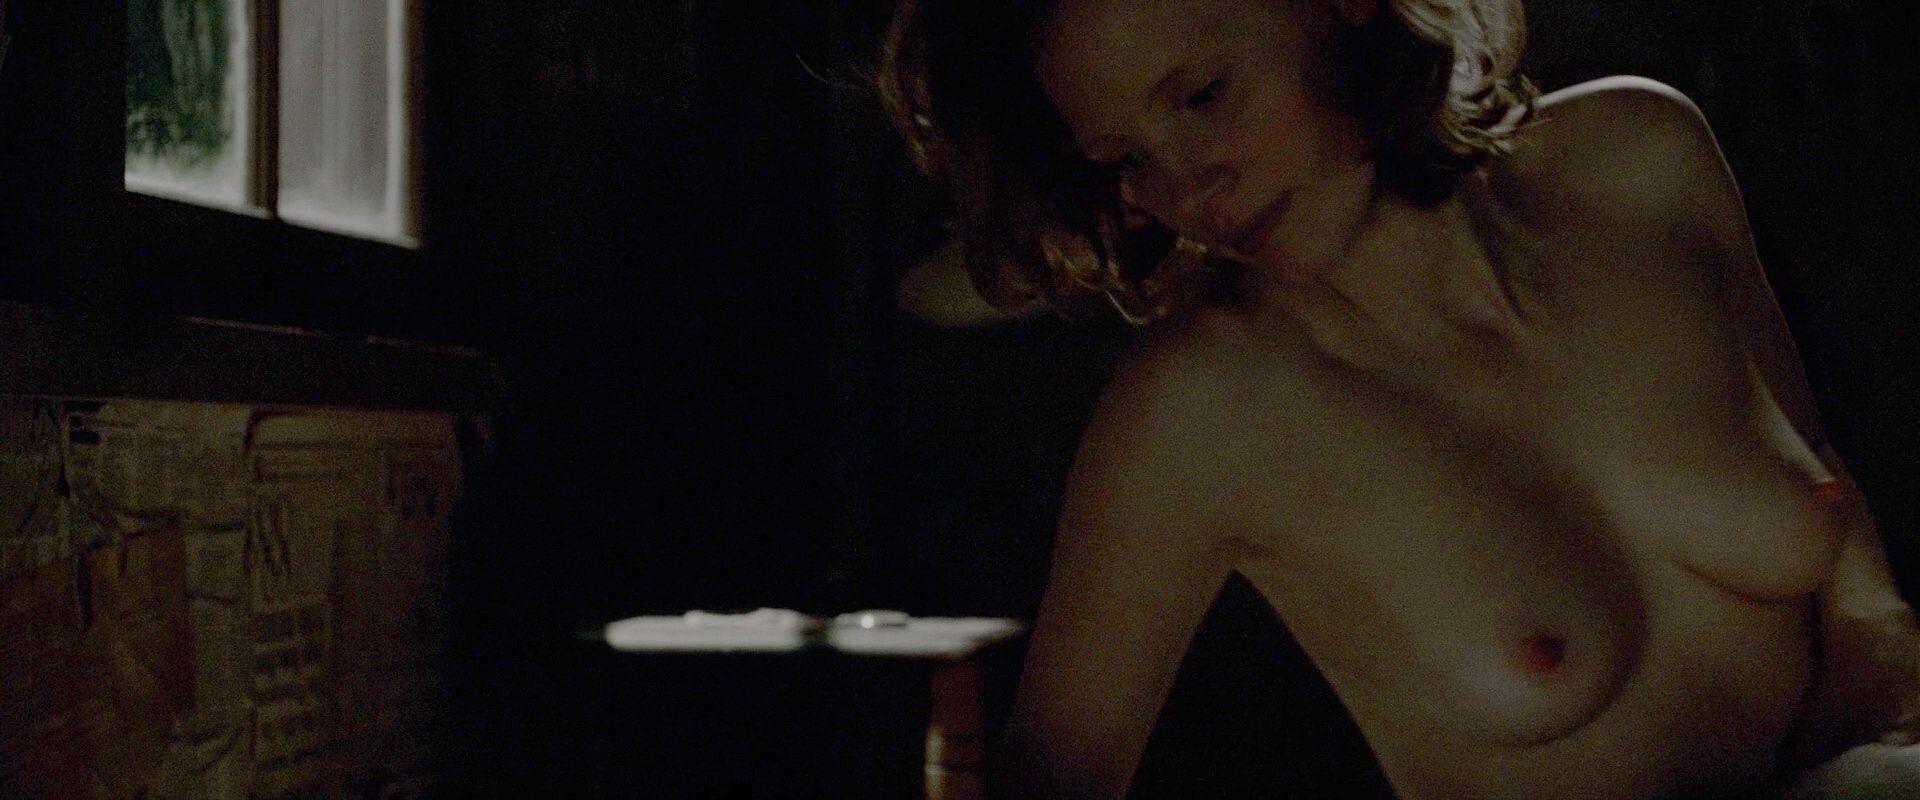 jessica chastain nude